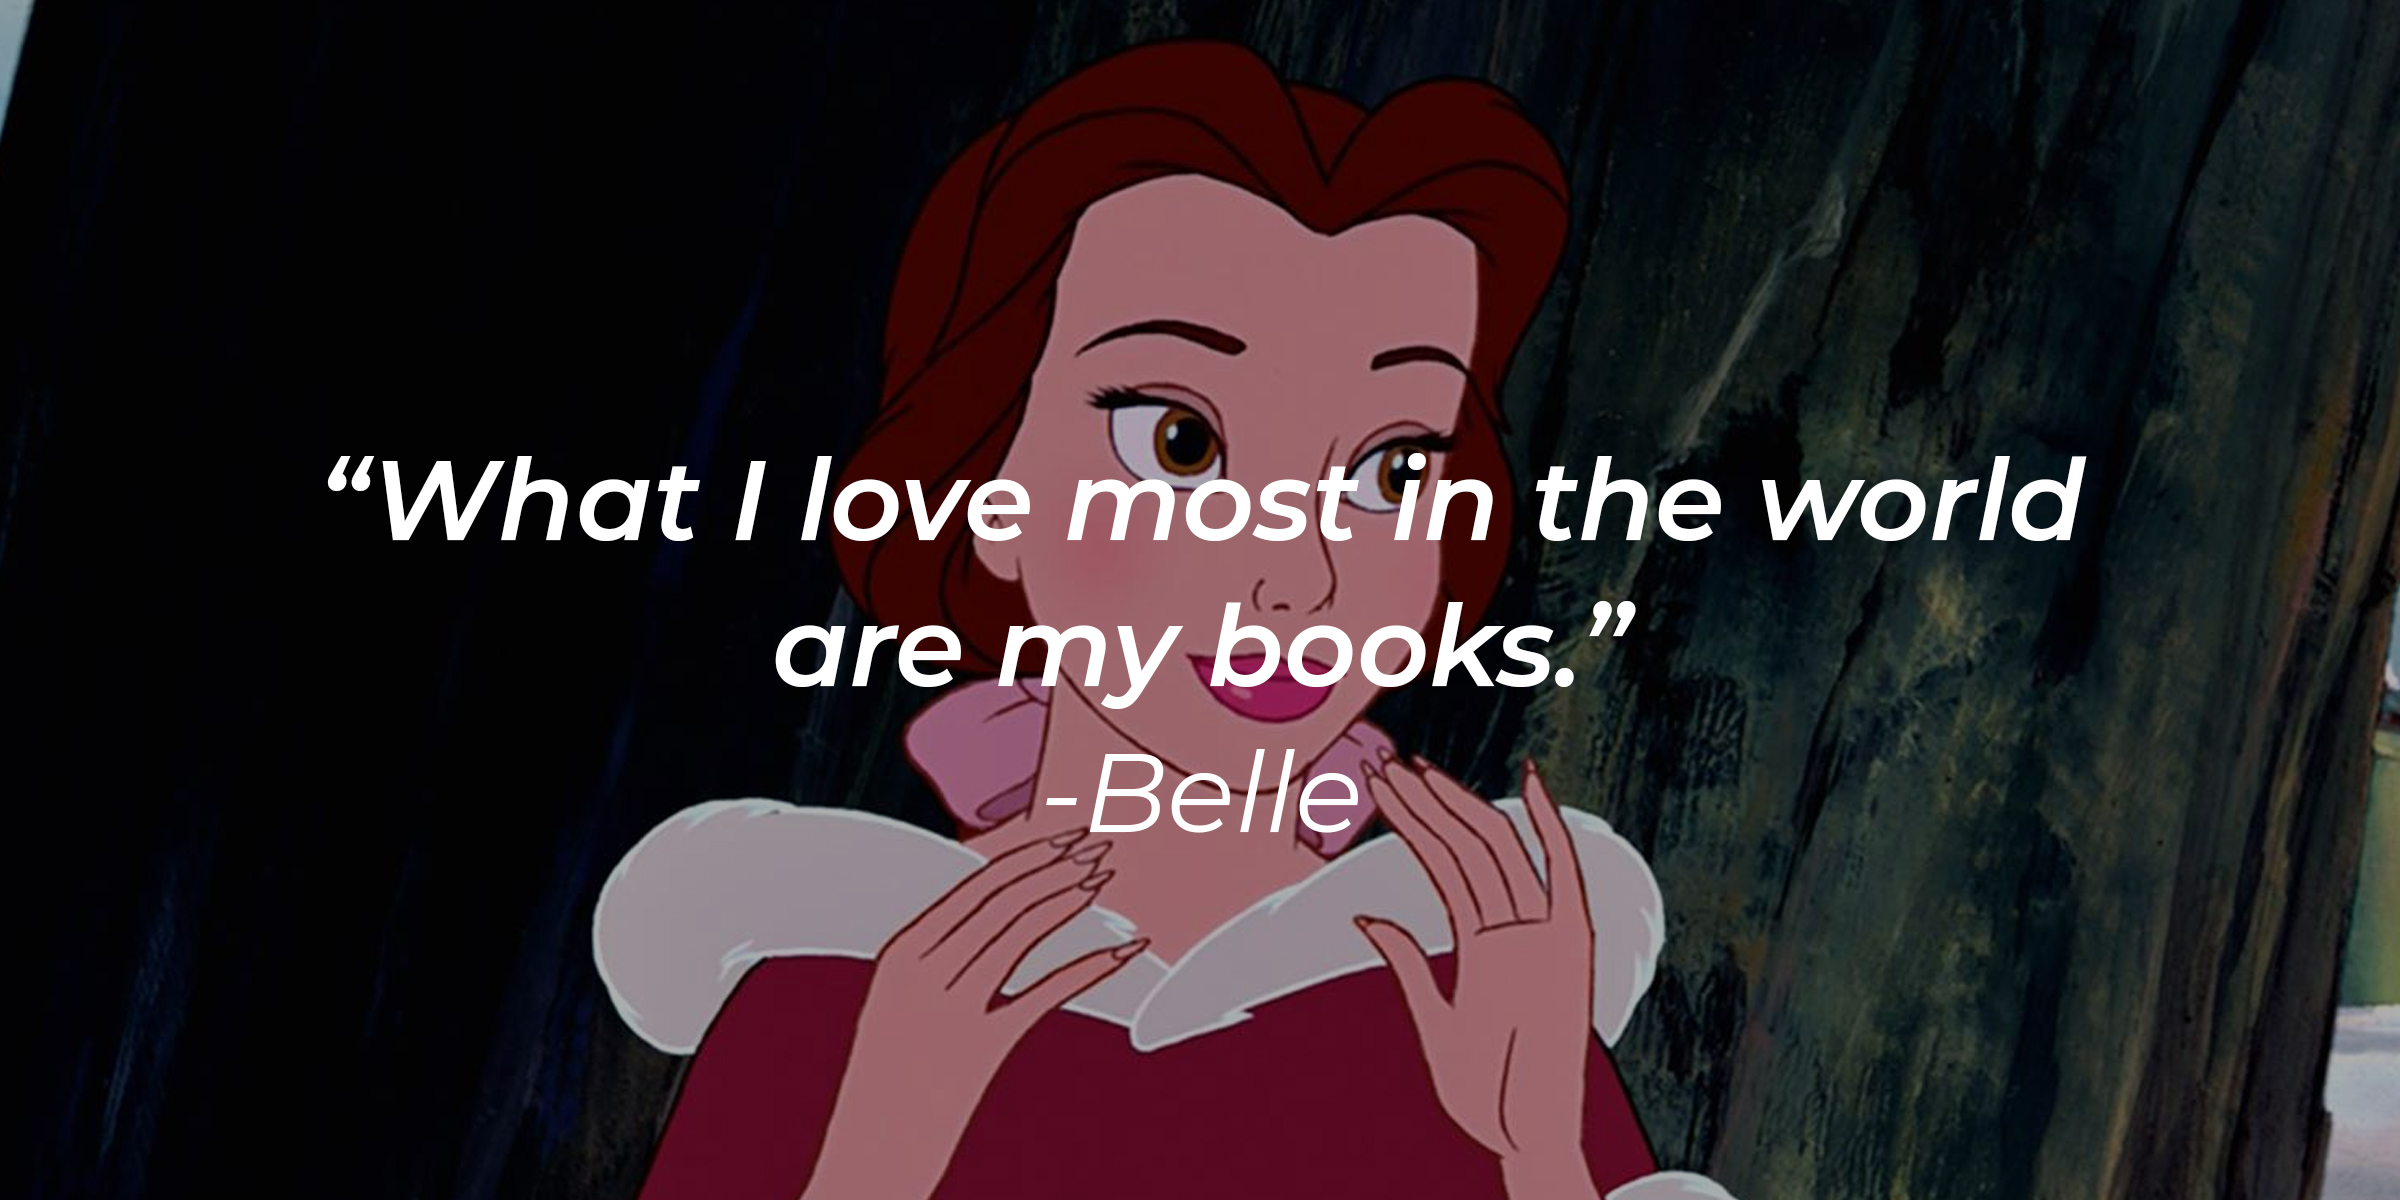 Belle's quote, "What I love the most in the world are my books." | Source: Facebook.com/DisneyBeautyAndTheBeast